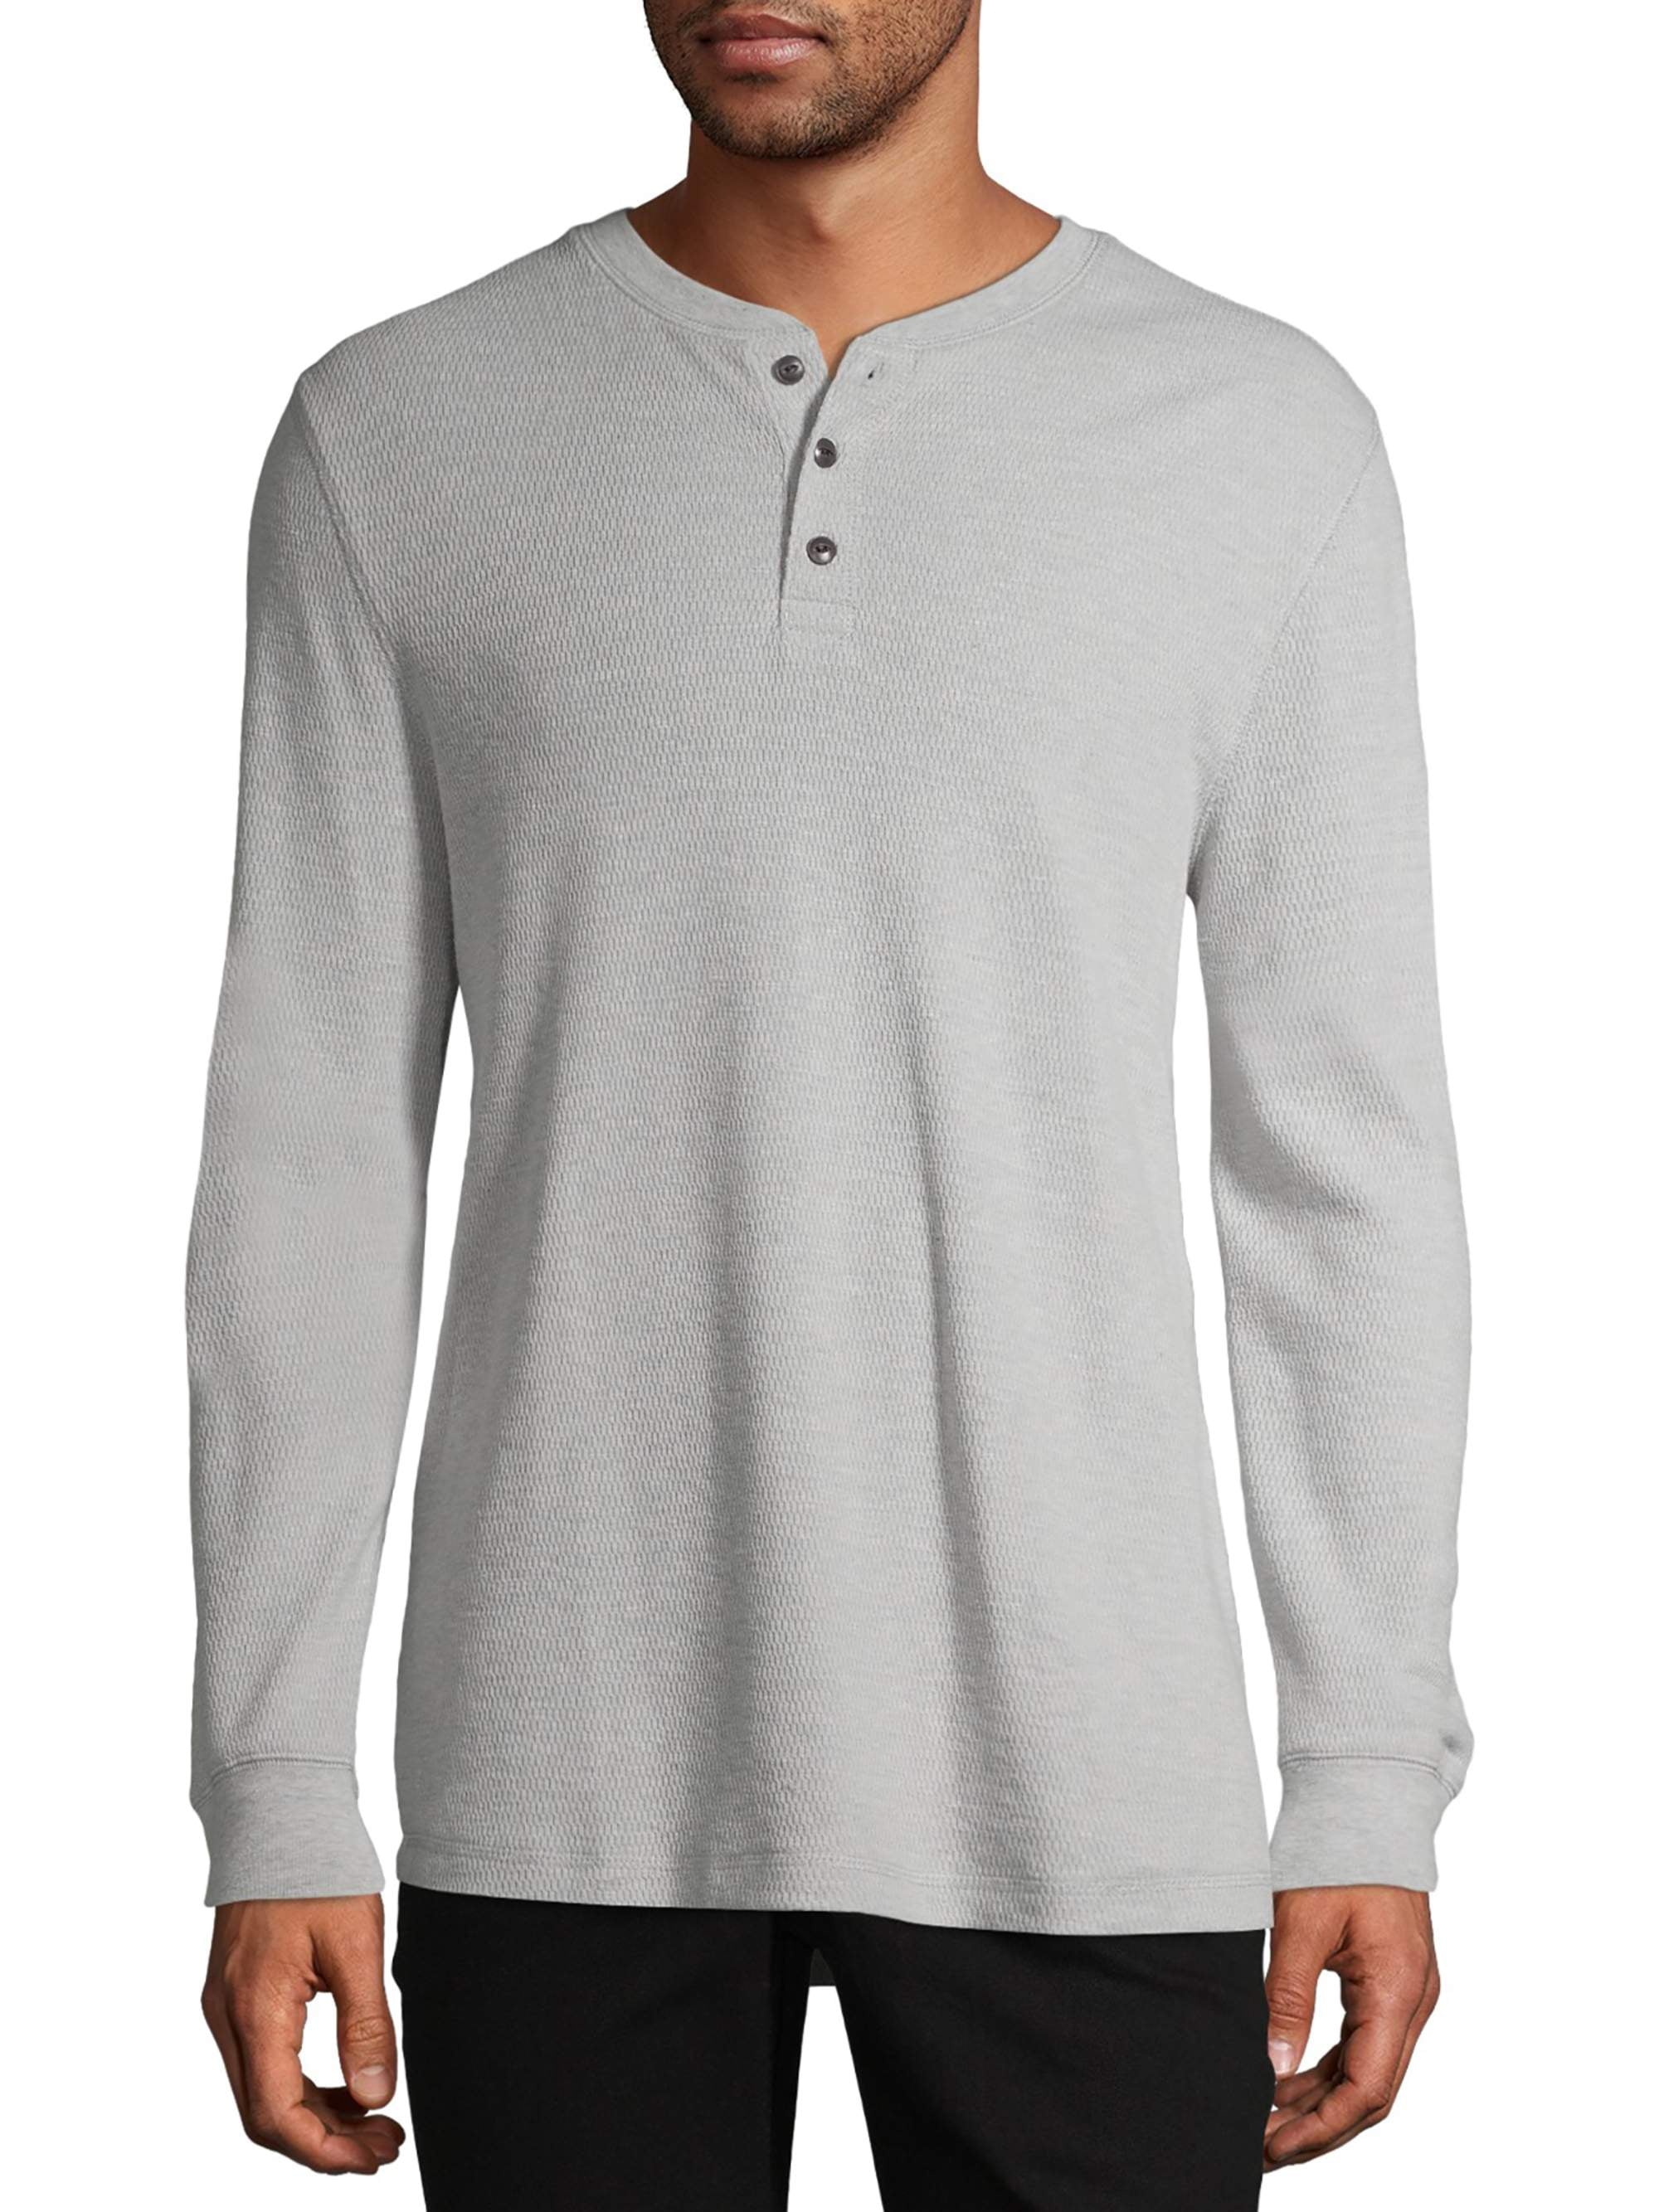 George Men's and Big Men's Long Sleeve Thermal Henley Shirt, Sizes up to  5XL 